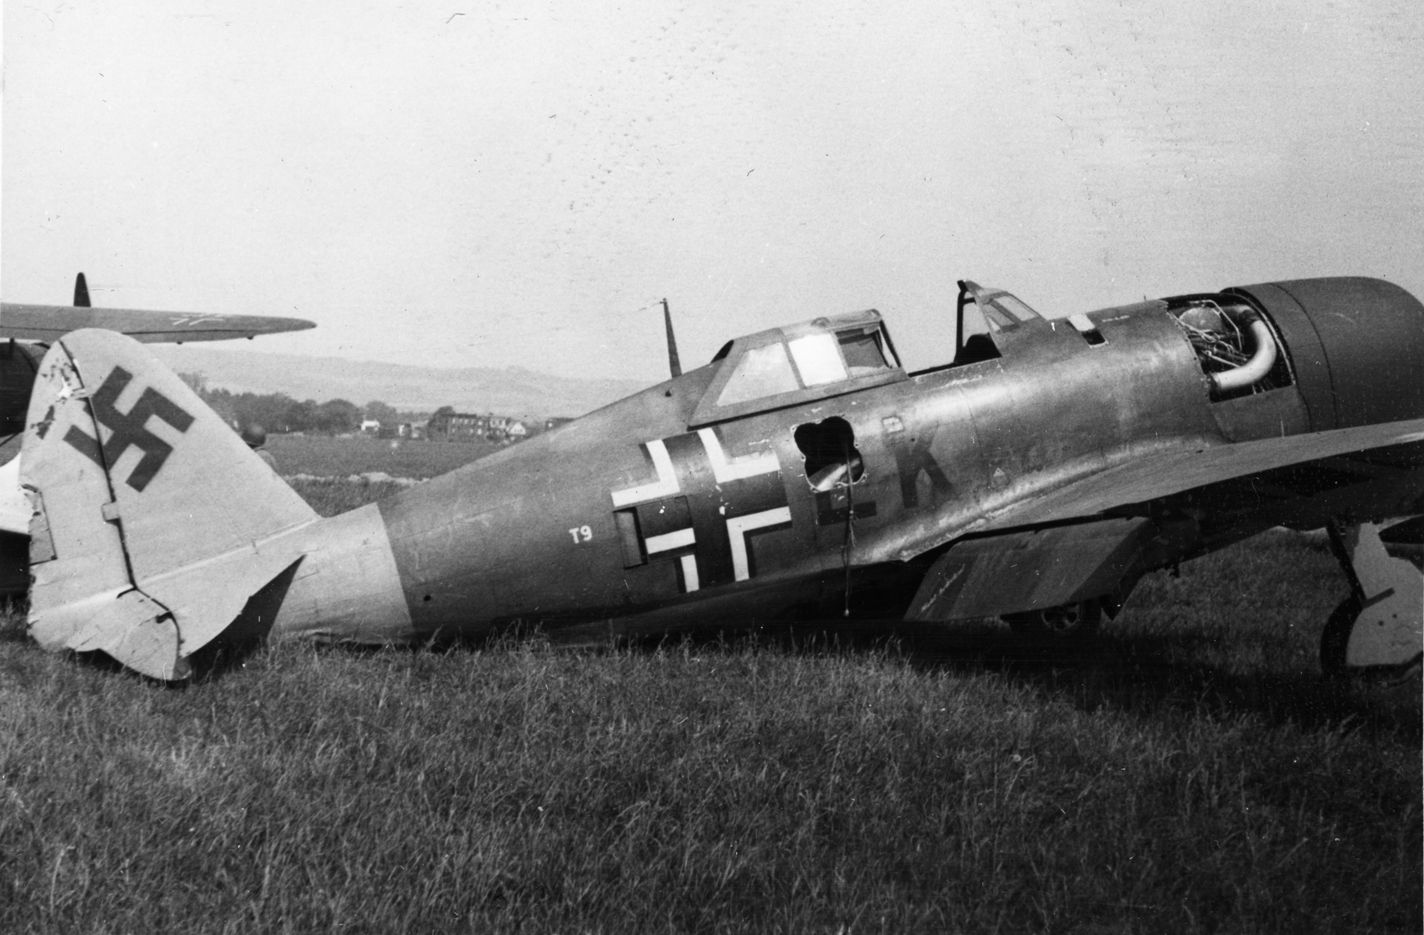 This photo, taken May 15, 1945, shows a captured Republic P-47 Thunderbolt fighter aircraft in German markings at Göttingen airfield in central Germany. Göttingen was a base for the Zirkus Rosarius, formed by Hauptmann Theodor Rosarius in 1943, a special test unit of the Luftwaffe high command. The unit tested captured British and American aircraft (called Beuteflugzeug) that were repainted with German insignia. The purpose was to discover the enemy aircraft design strengths, vulnerabilities, and performance, and to use the information to enable German pilots to develop countertactics.